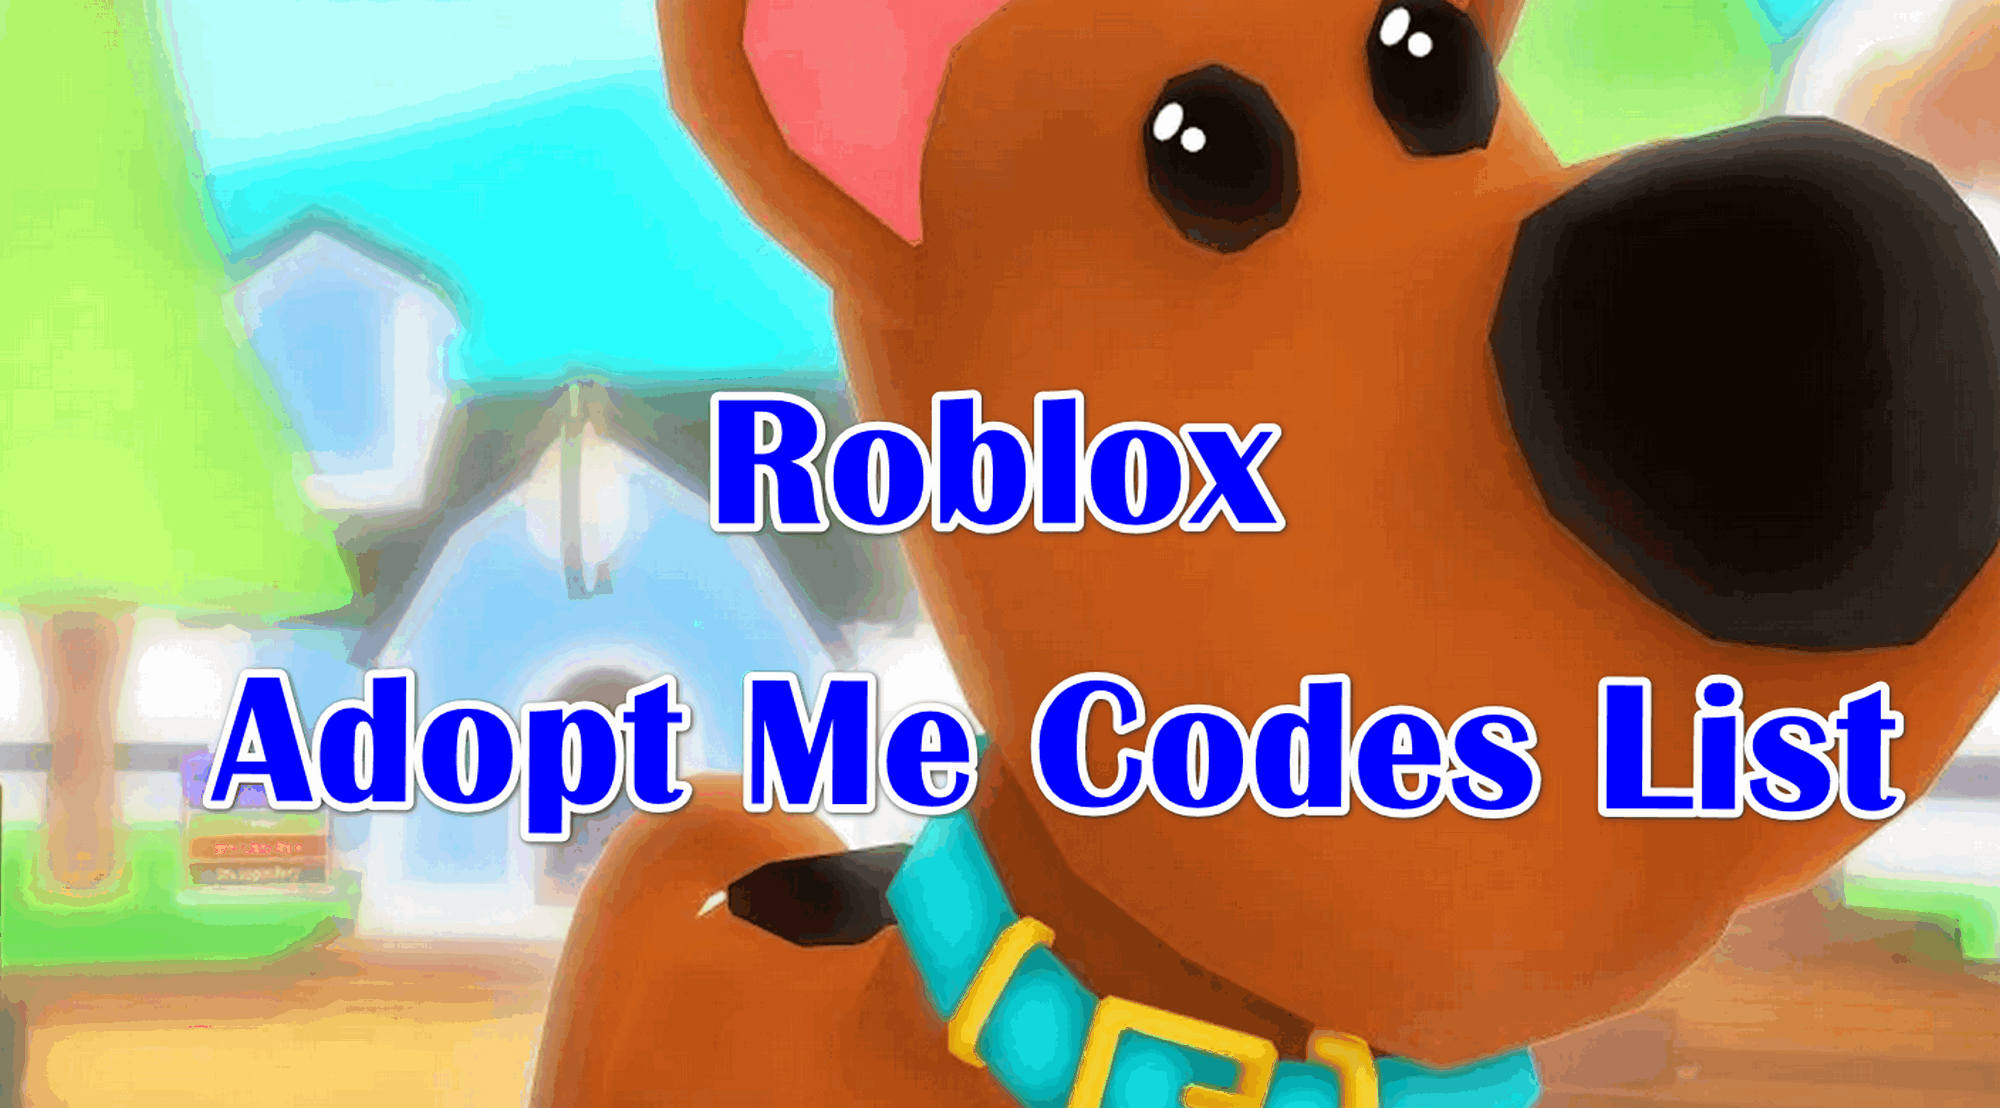 codes for adopt me